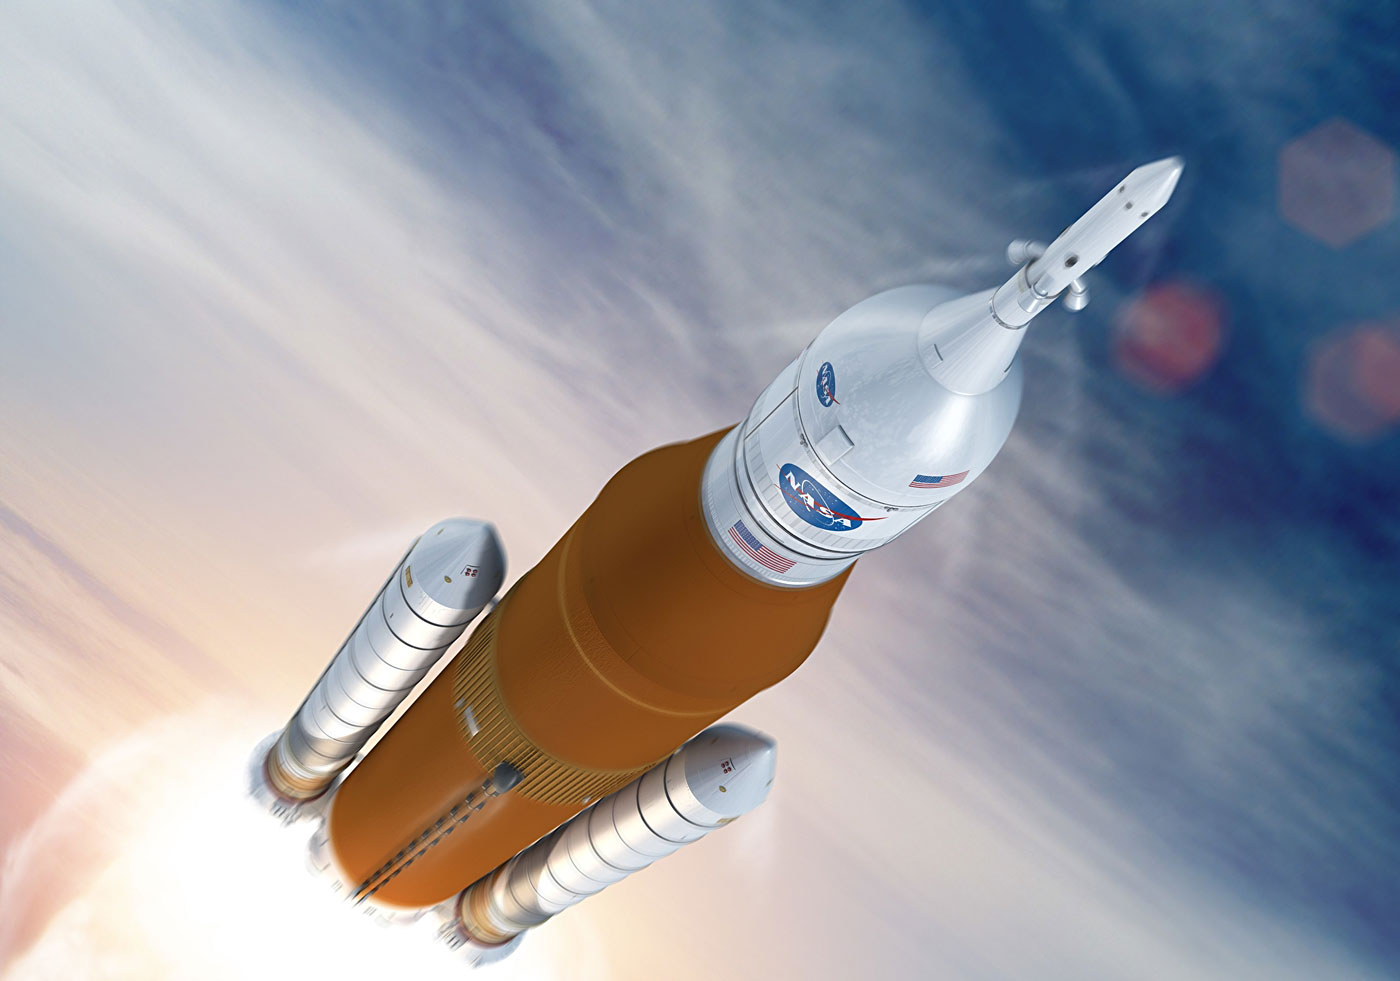 Featured image for “2019 Sees NASA’s SLS Getting Closer To Take Off”